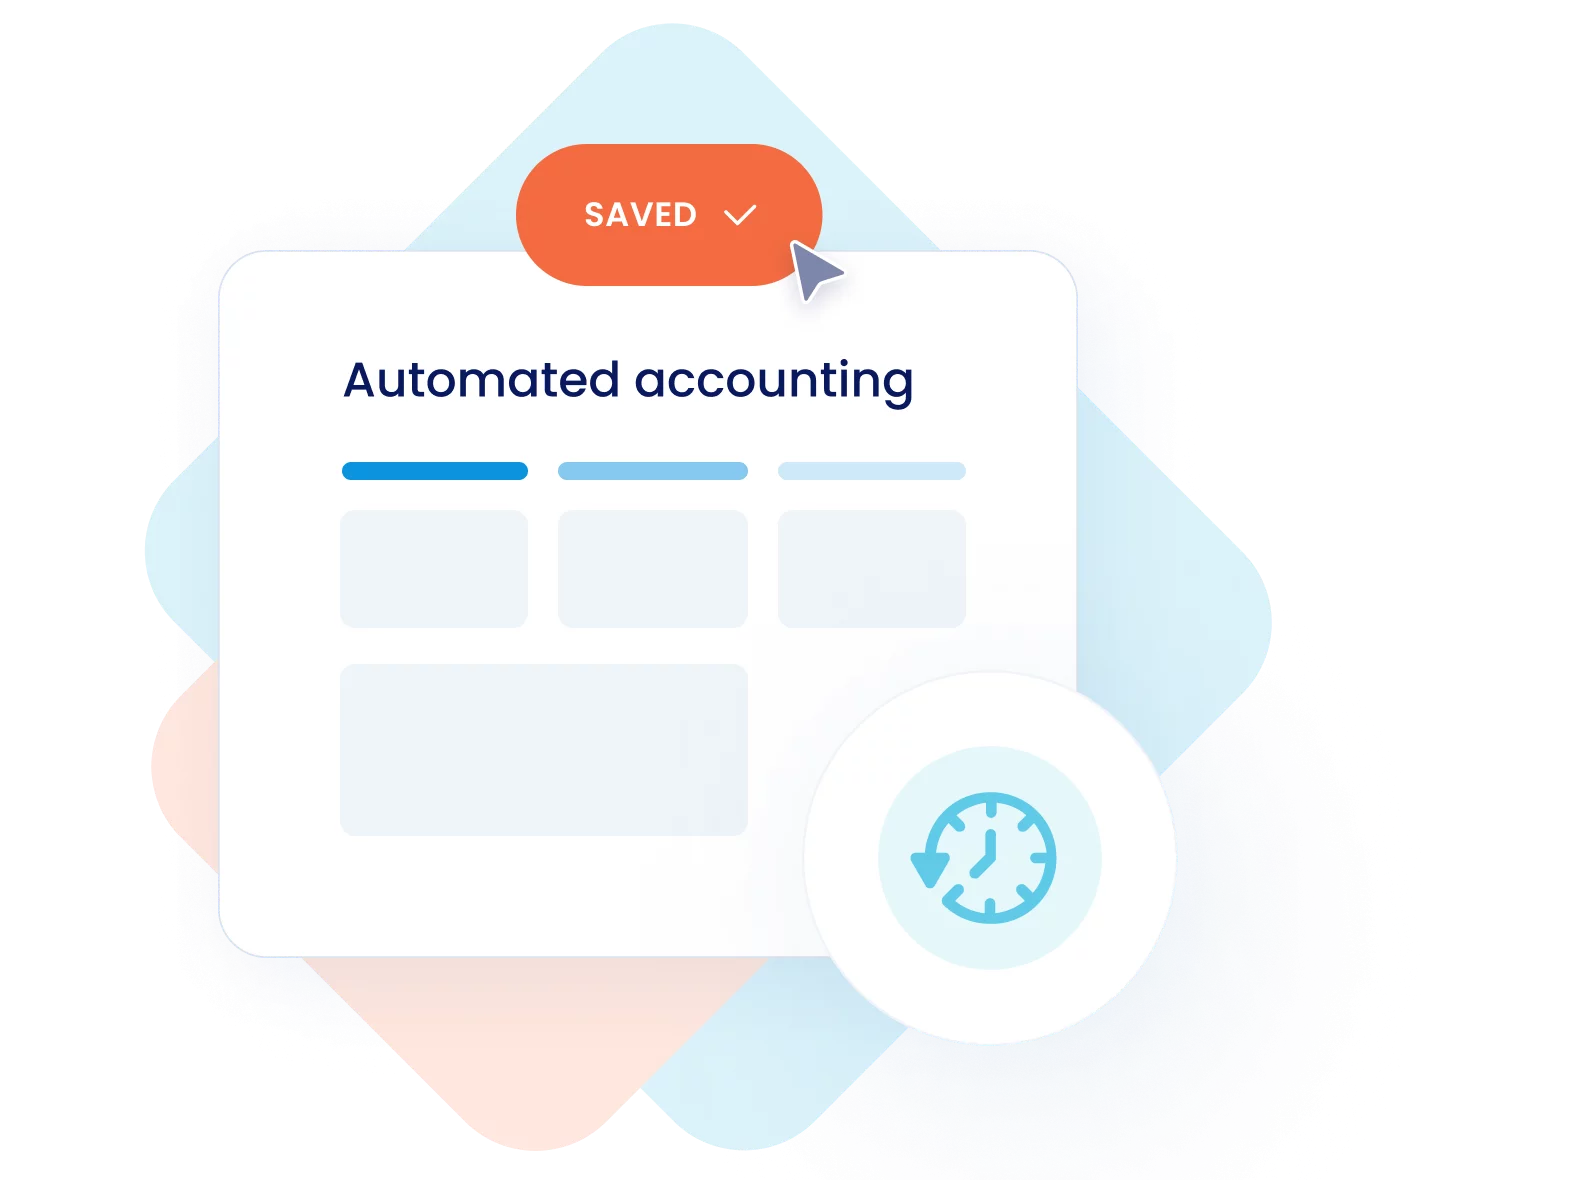 Automated accounting image